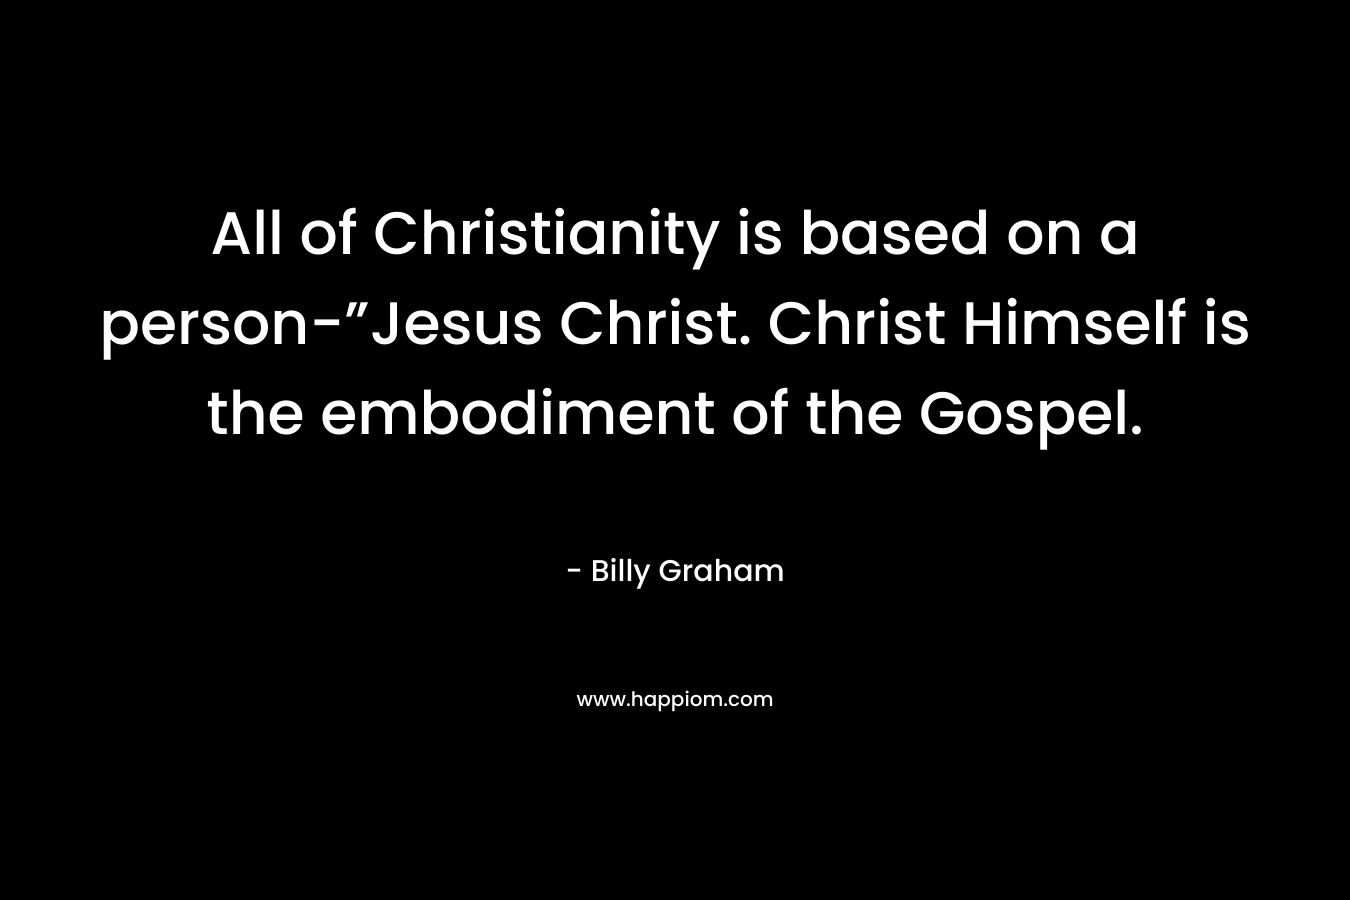 All of Christianity is based on a person-”Jesus Christ. Christ Himself is the embodiment of the Gospel.